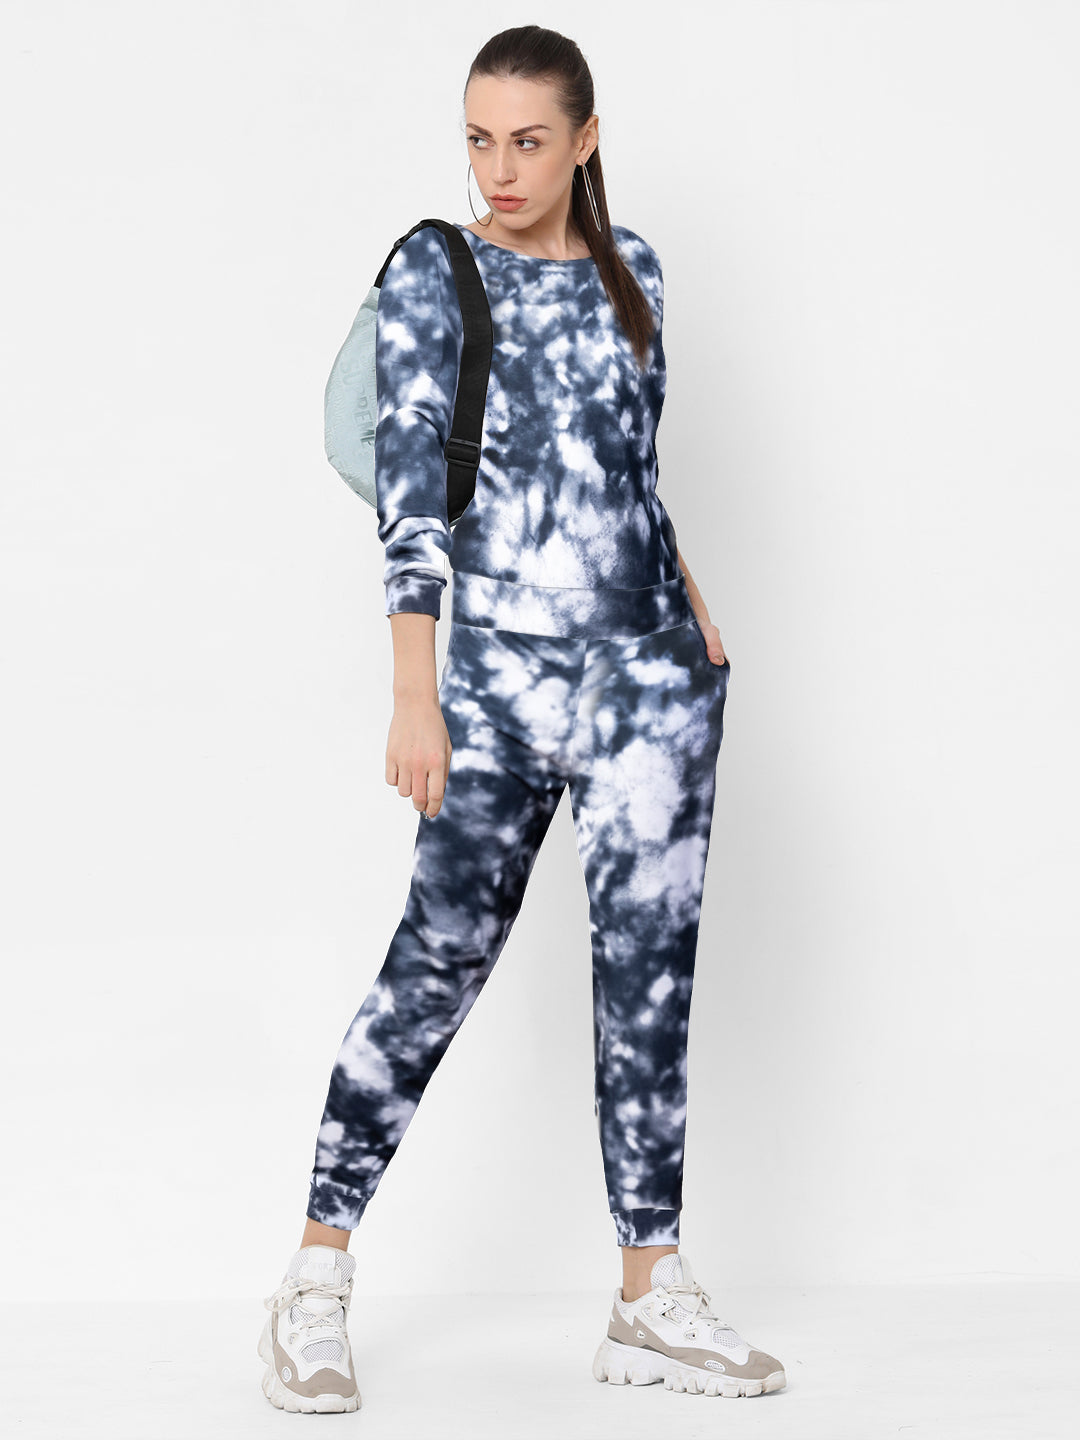 Tie and Dye Tracksuit Set